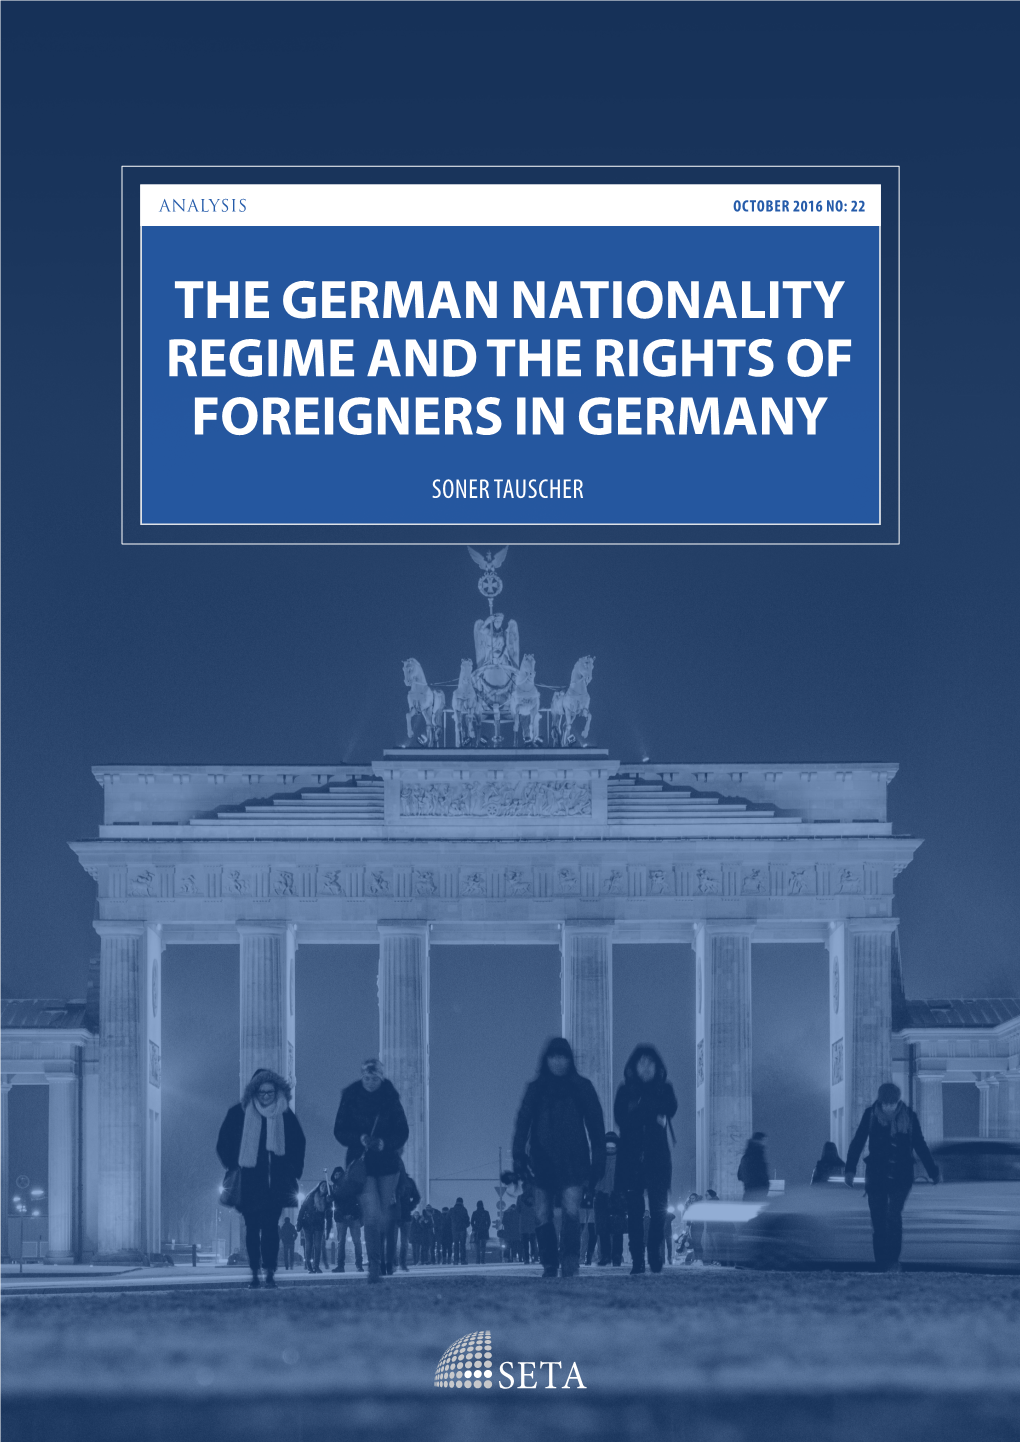 The German Nationality Regime and the Rights of Foreigners in Germany